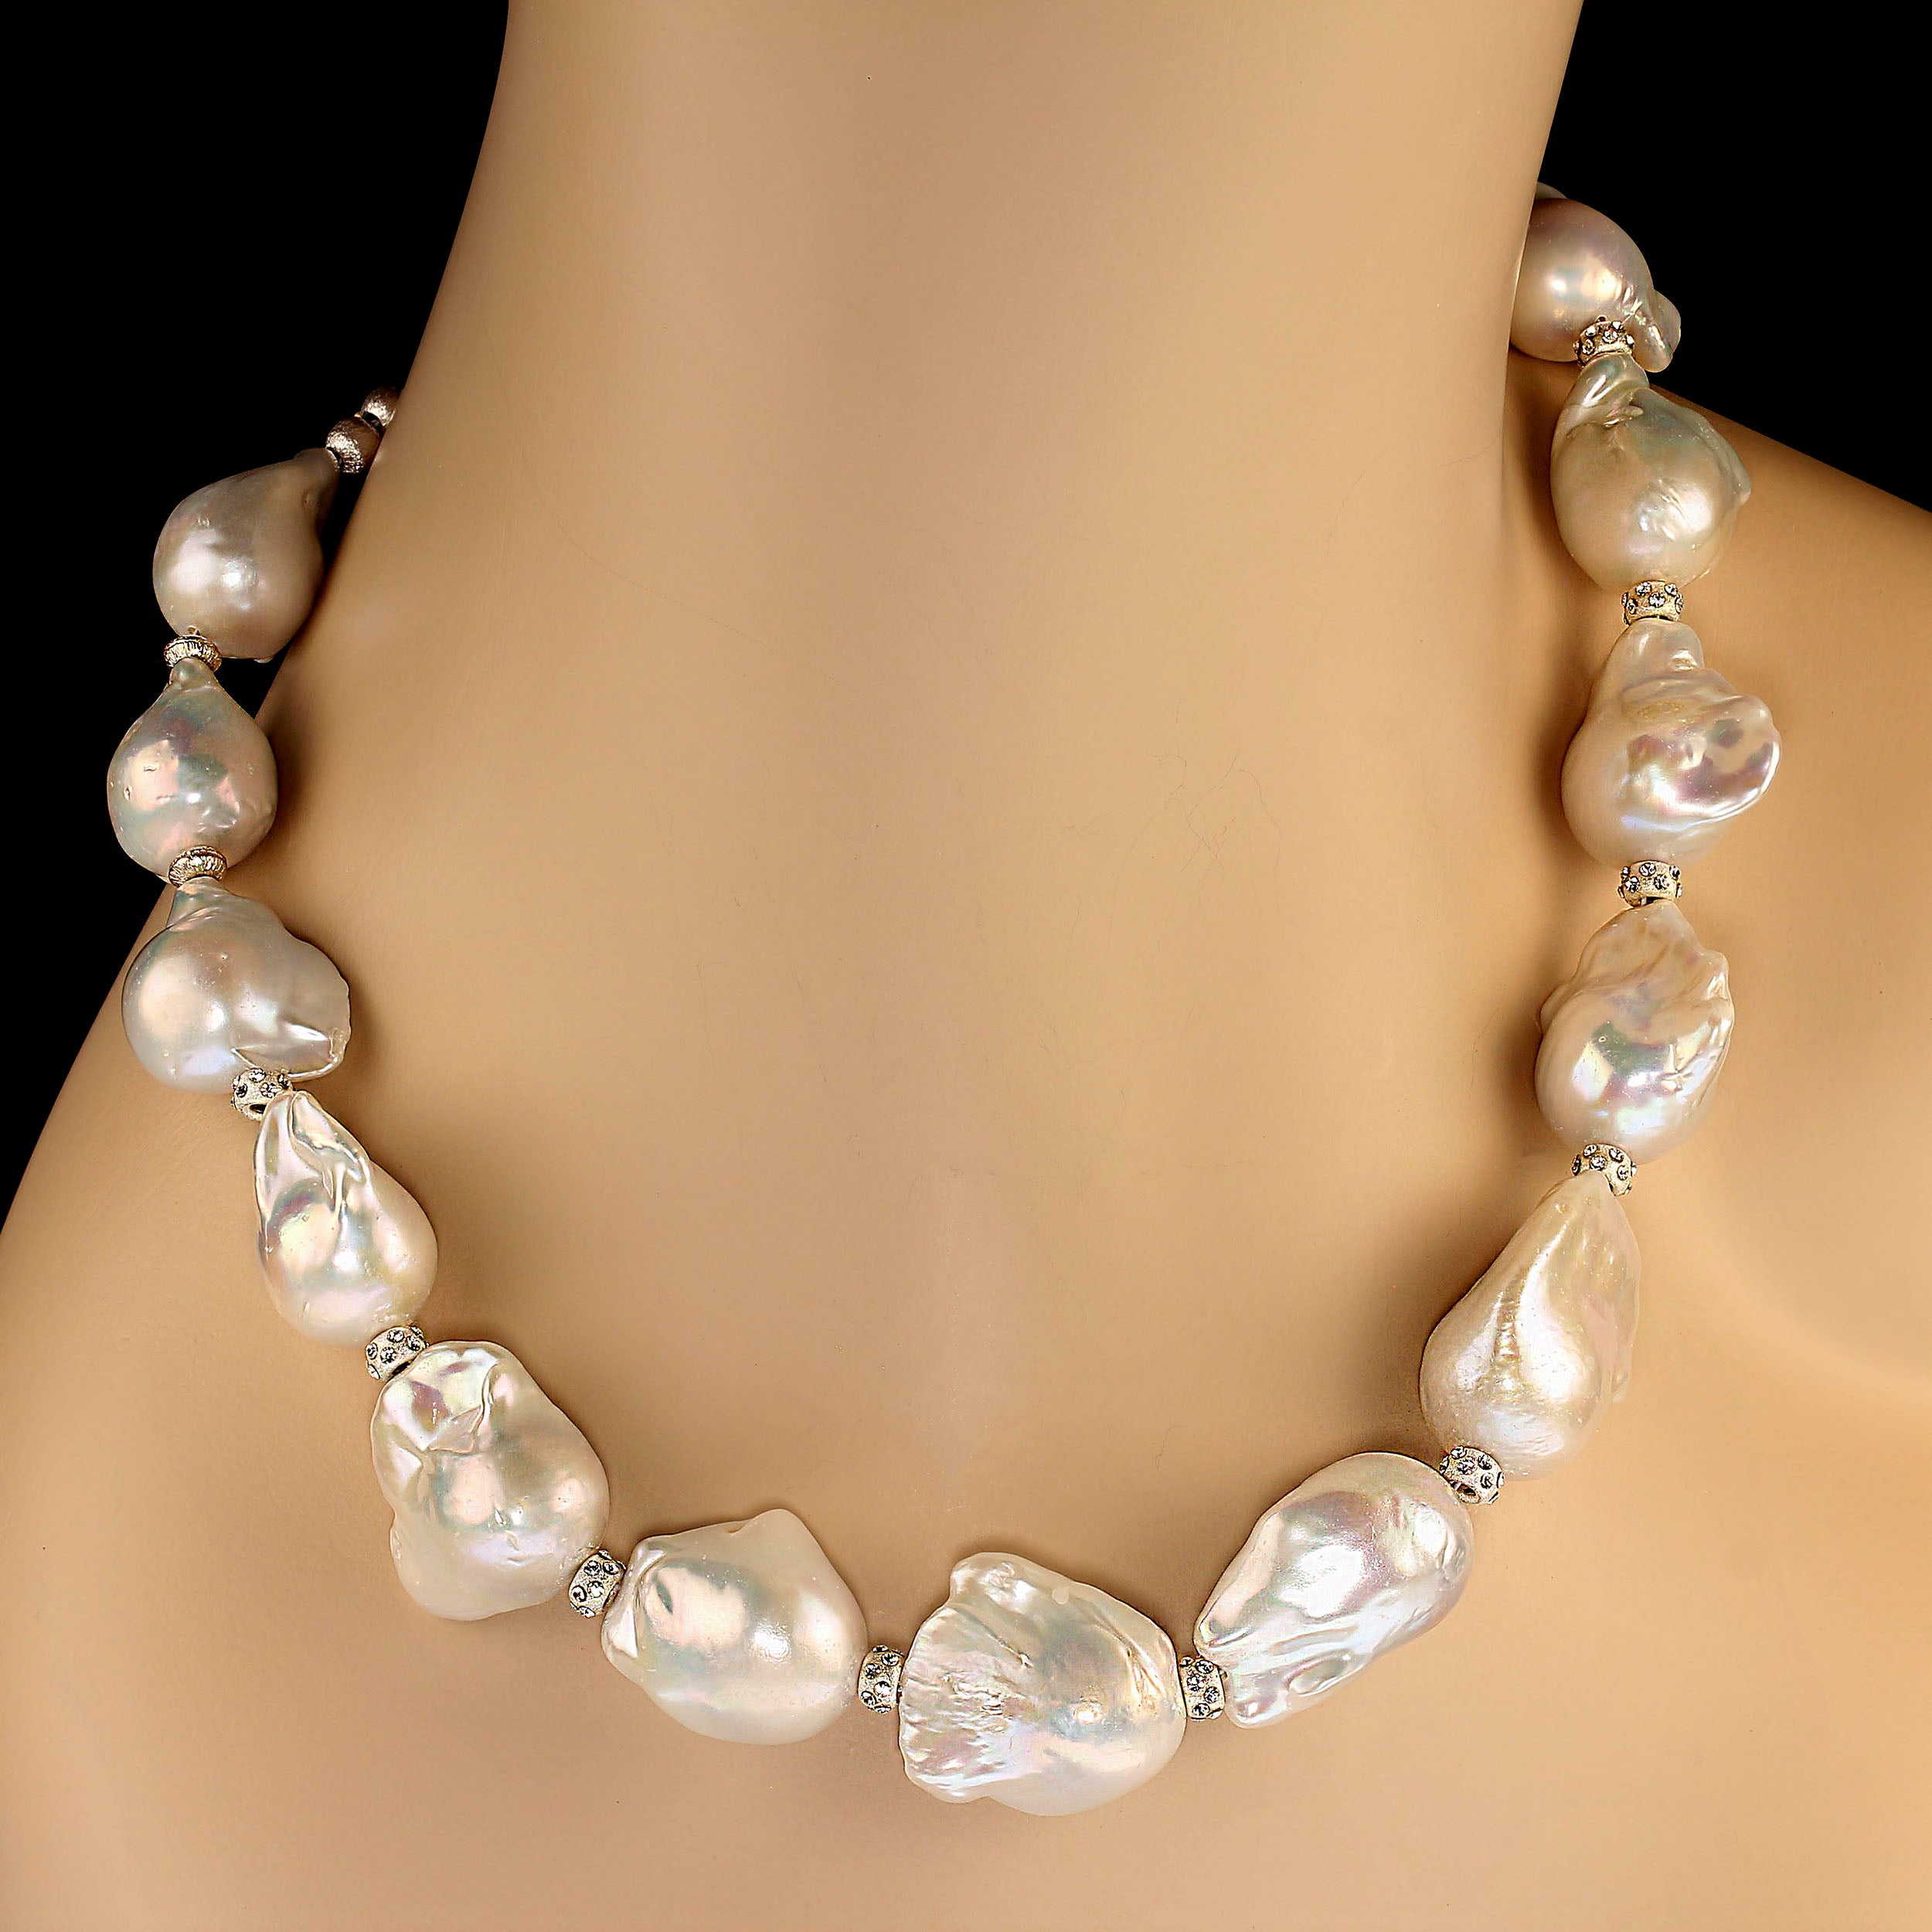 AJD 19 Inch Giant White Baroque Pearl Necklace with Sparkling Crystal Accents For Sale